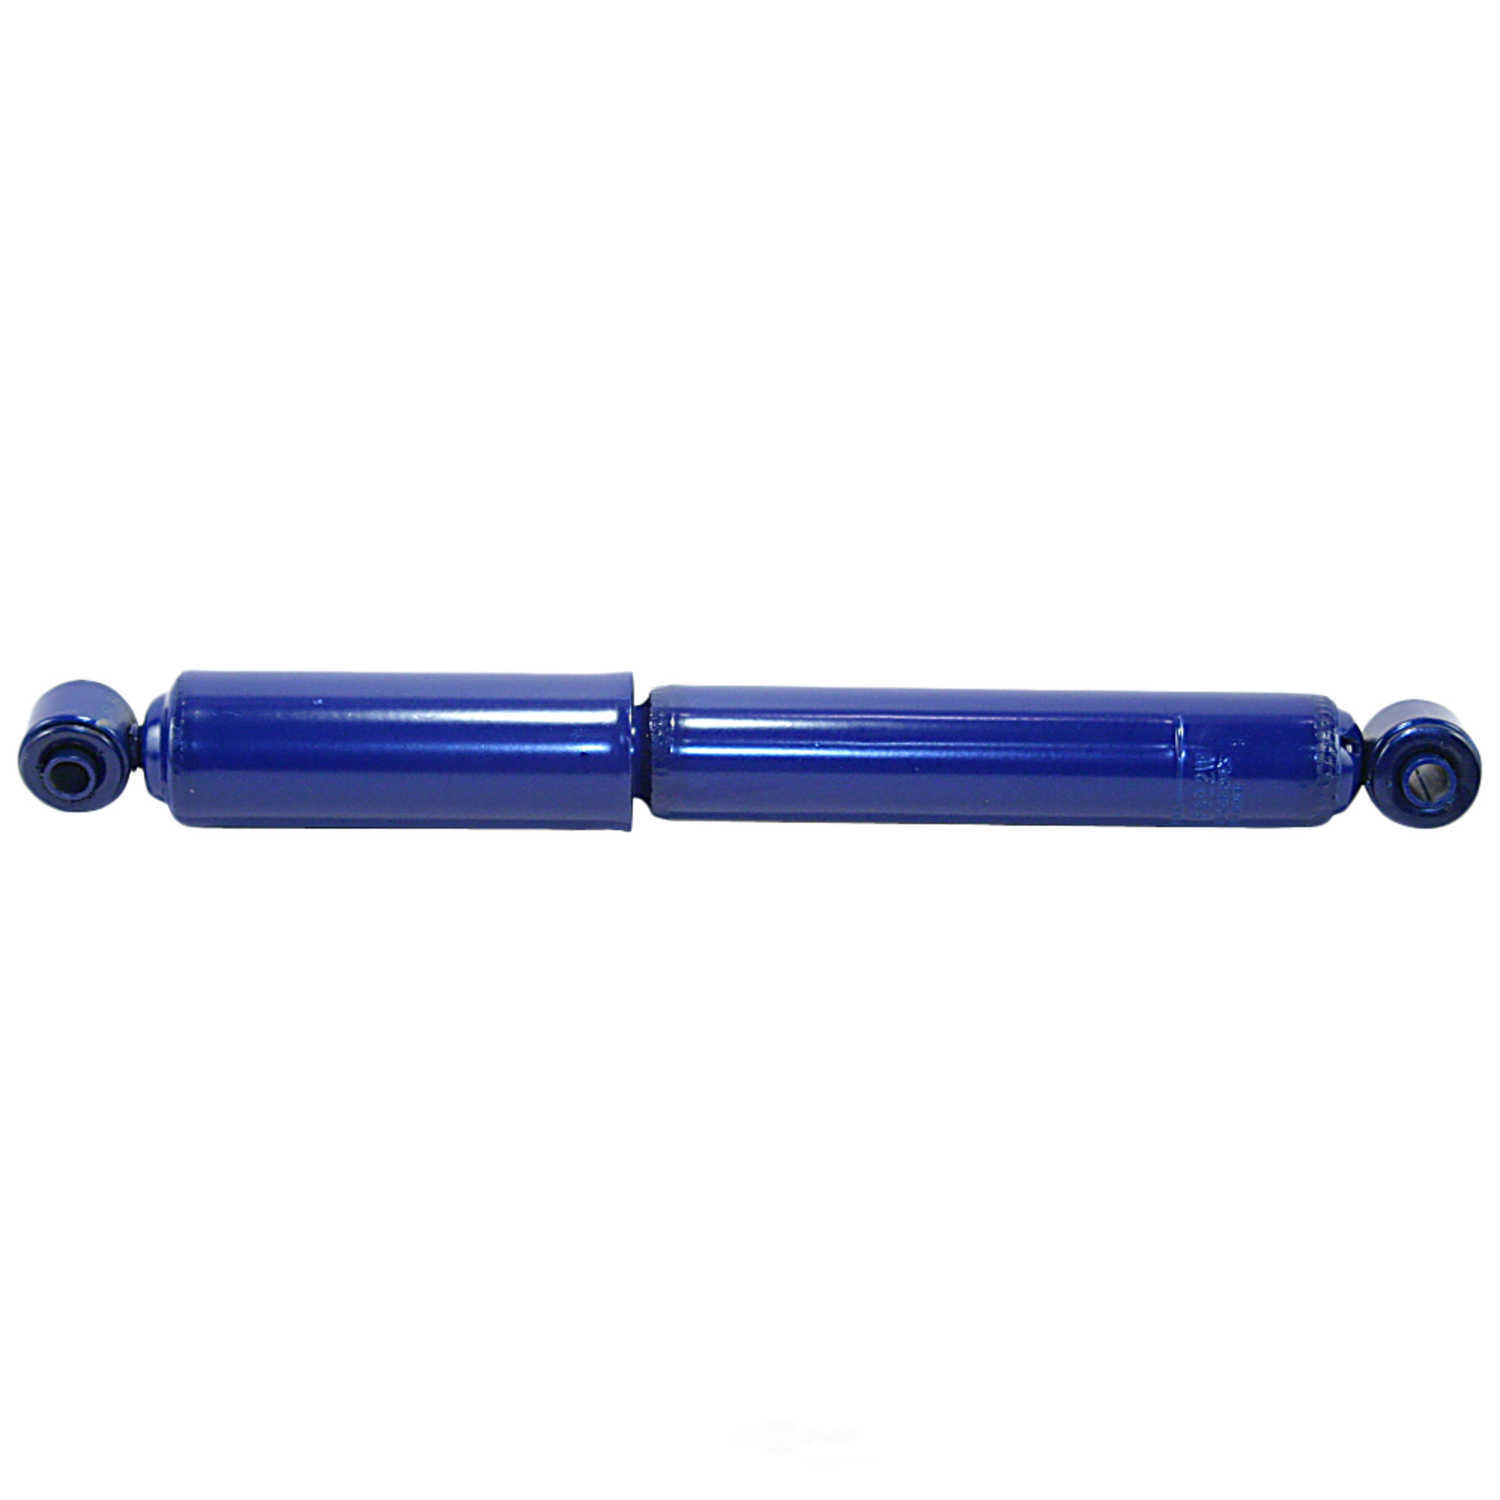 MONROE SHOCKS/STRUTS - Monro-Matic Plus Shock Absorber (With ABS Brakes, Front) - MOE 32405